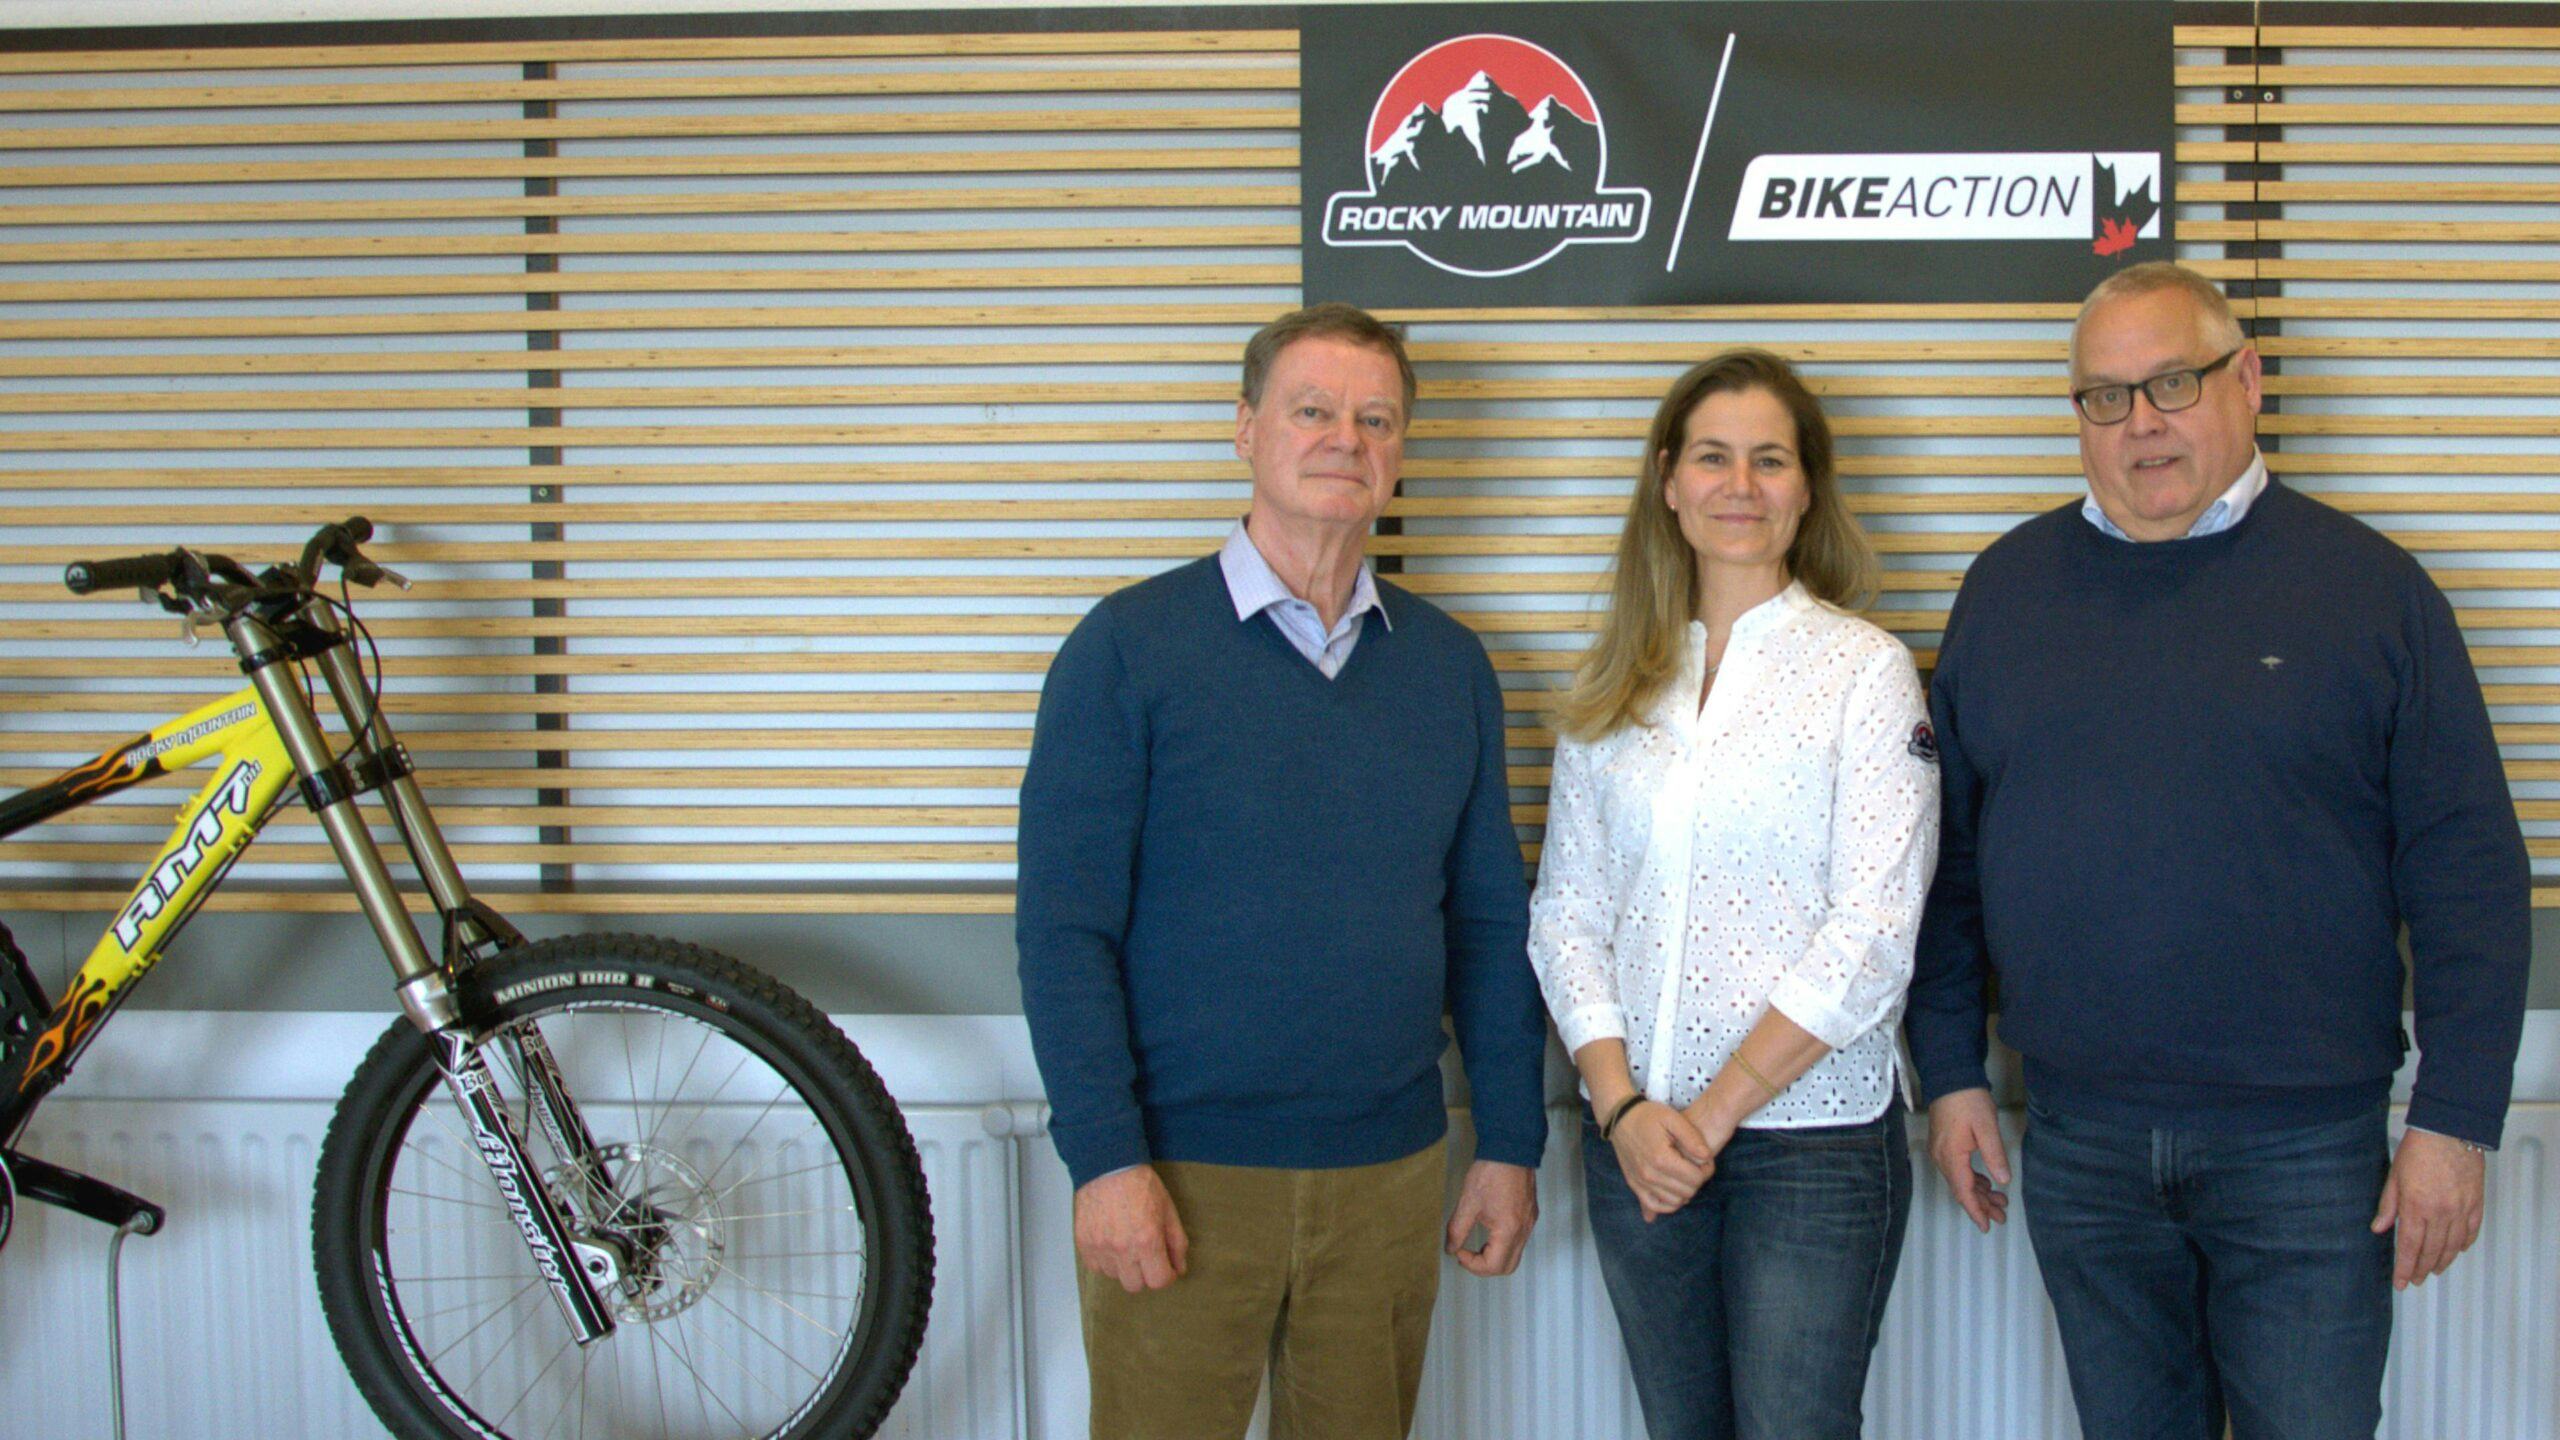 BikeAction owner Christoph Goebel (l.) handed over the business to Rocky Mountain Executive Chairman, Raymond Dutil (r.) and CEO Katy Bond (m.) – Photo Rocky Mountain